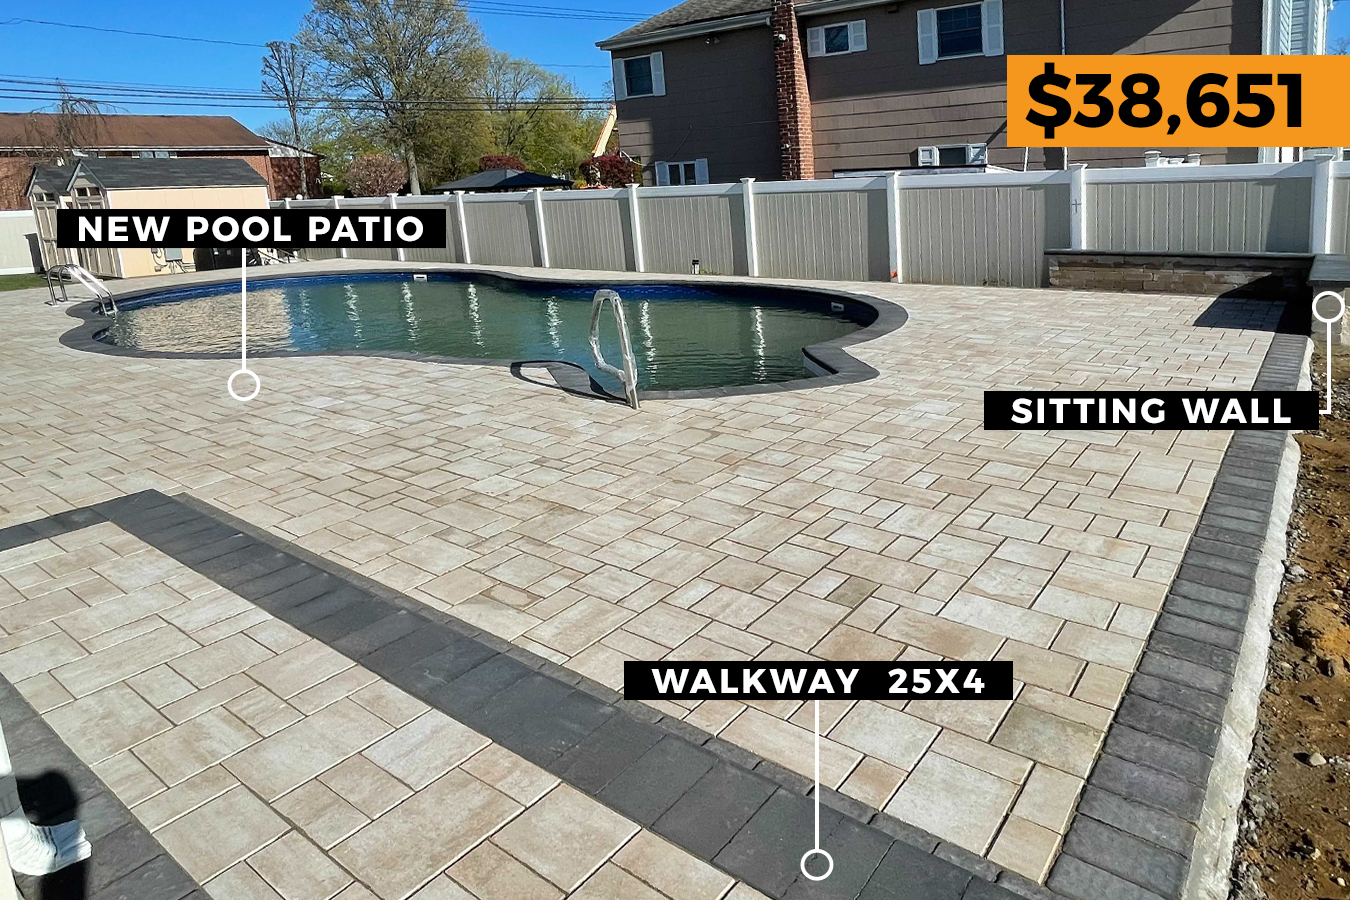 Pool patio installers near me, Pool patio installer, A paver driveway leads to a detached garage, providing ample space for parking and storage. | Back yard patio contractor